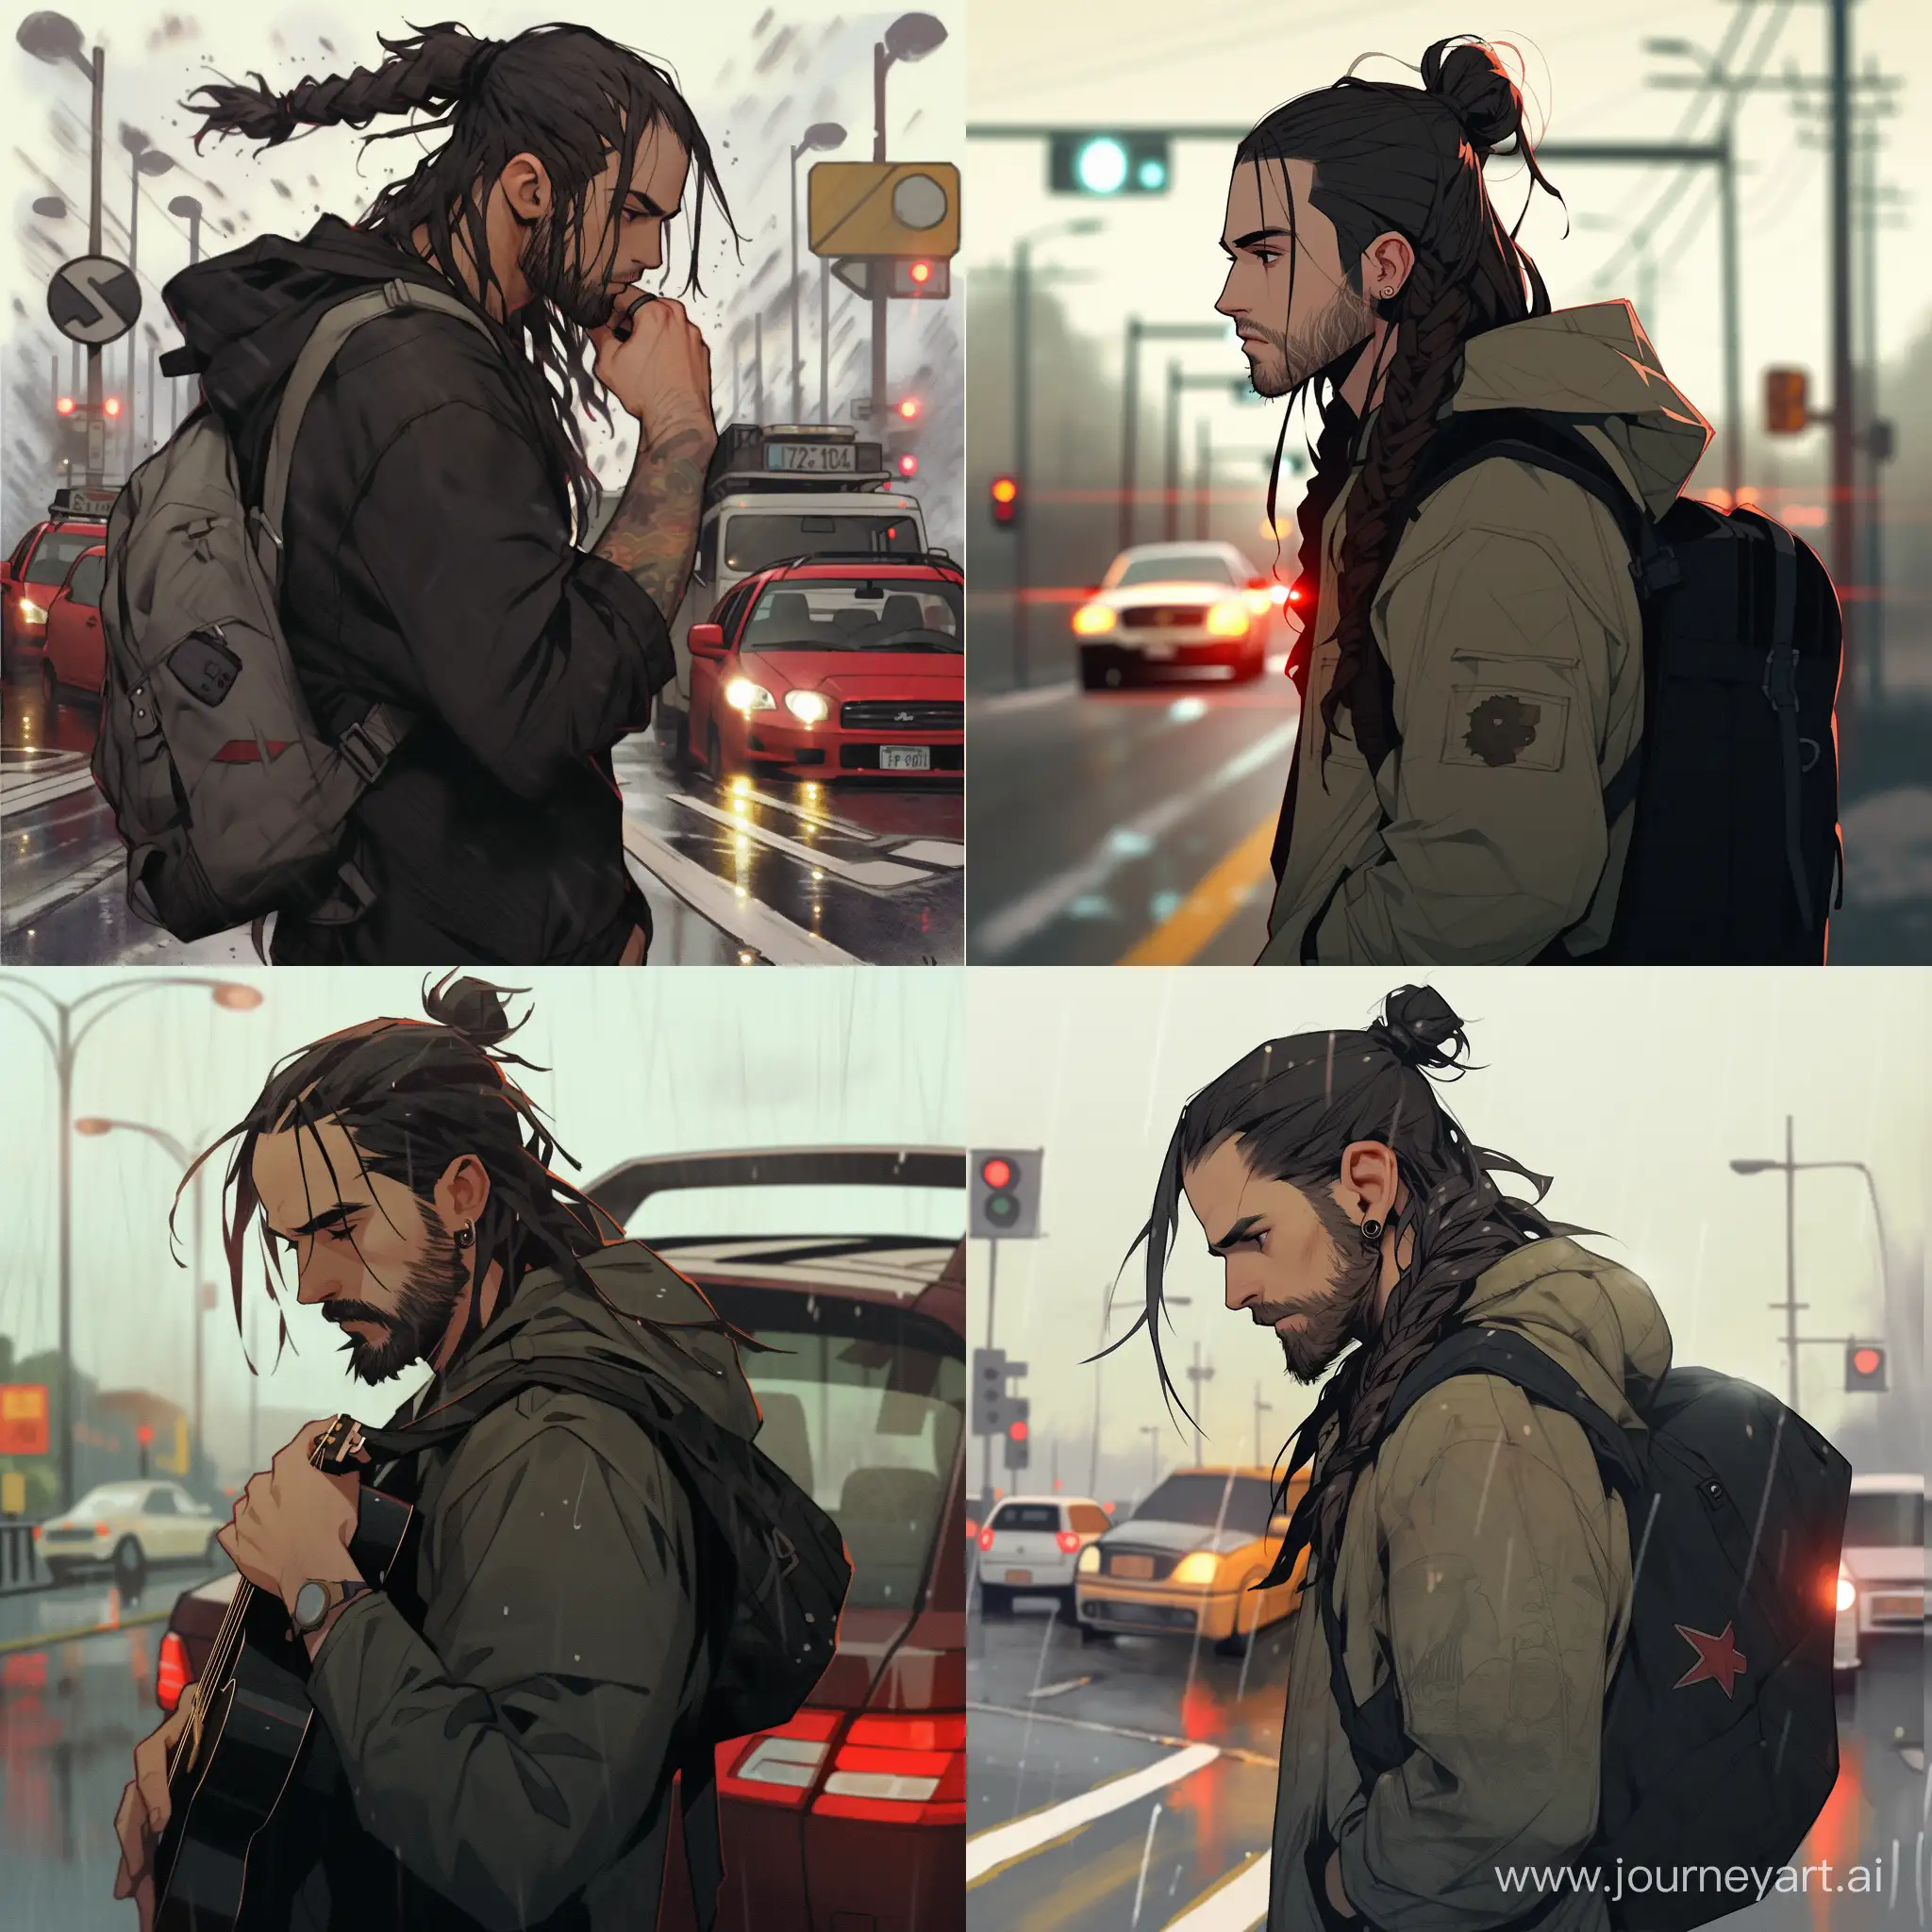 single guy, long black hair, hair pulled back in a disheveled ponytail. brown eyes,brown-eyed guy, hoodie, dark jeans, sneakers, long black hair pulled back in a ponytail, cigarette, traffic light, rain, dark clouds, red traffic light, light rain soaked his clothes, deserted environment, musician looking for inspiration, symbolizing loneliness, symbolizes isolation in the modern world, worth on the side of the road, leaning against the fence, looking thoughtfully into the distance, a cigarette smoldering in his hand, the atmosphere is gloomy, melancholic, contemplative, post rock art style, hard composition, hard perspective --niji --s 250 --ar 1:1 --v 6